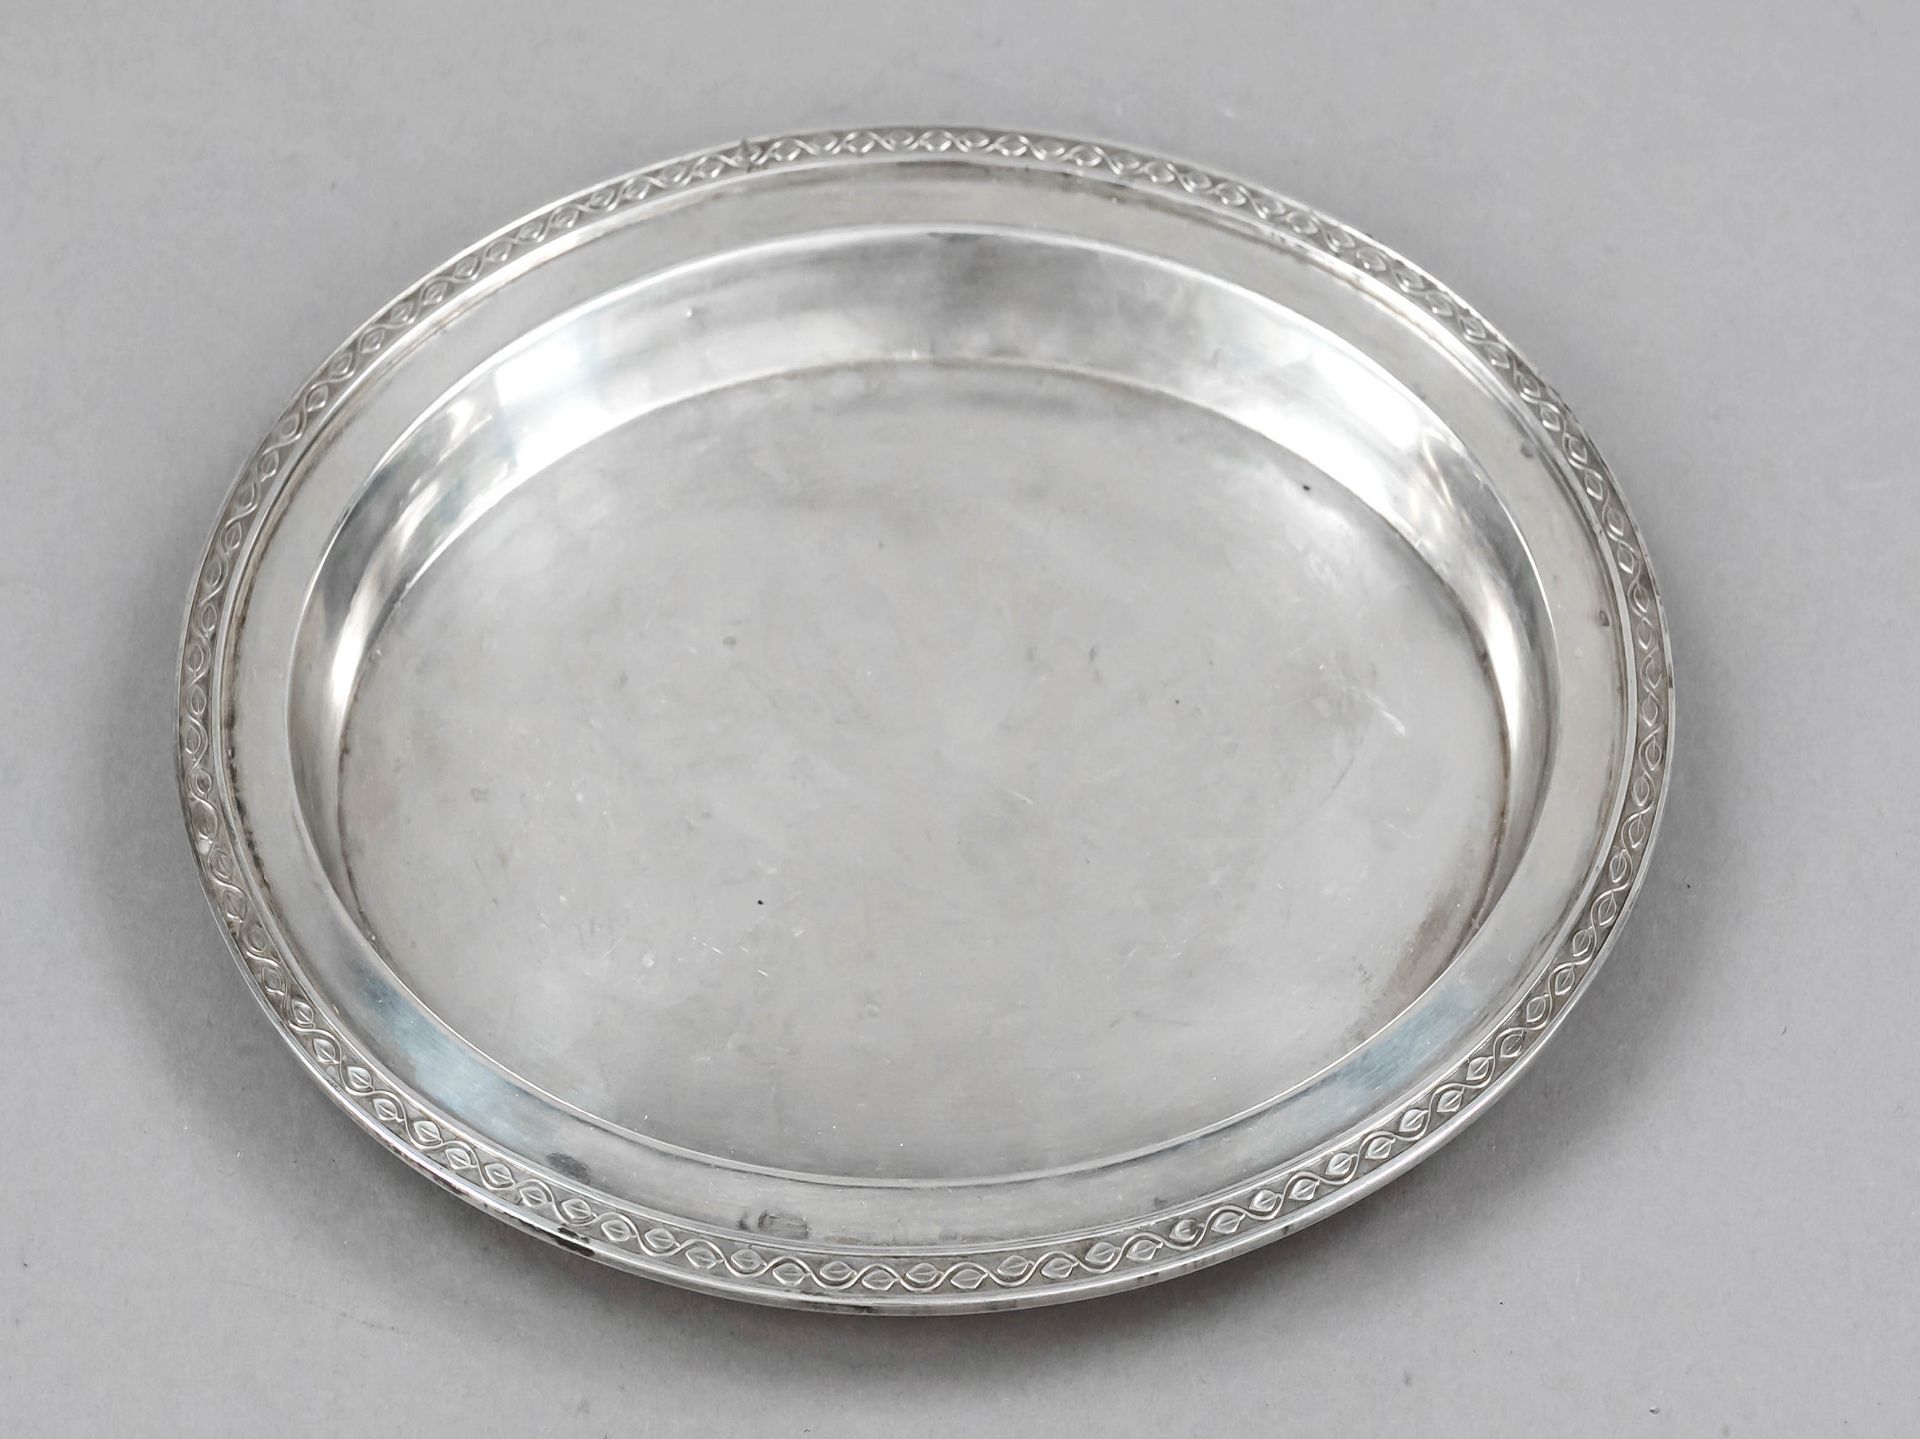 Oval plate, Russian import mark, after 1908, silver 84 zolotniki (875/000), moulded form, relief